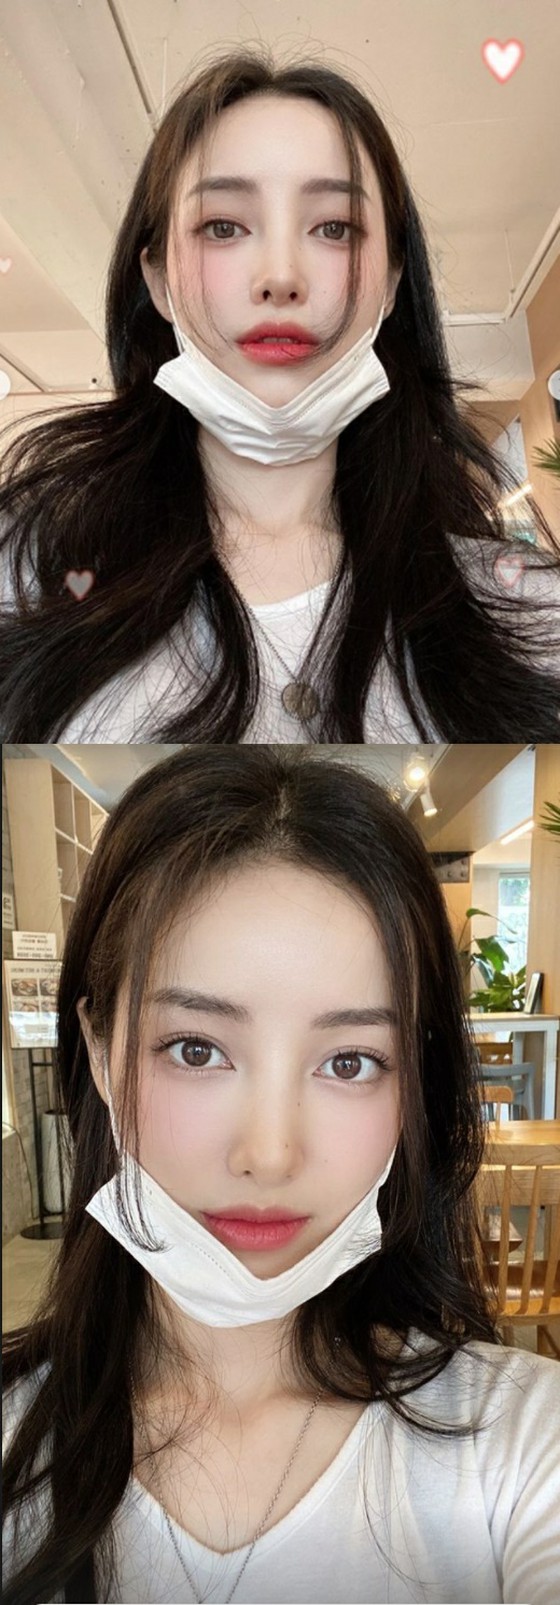 Beauty YouTuber YU CAT NIP reveals recent status after "chest and face surgery"